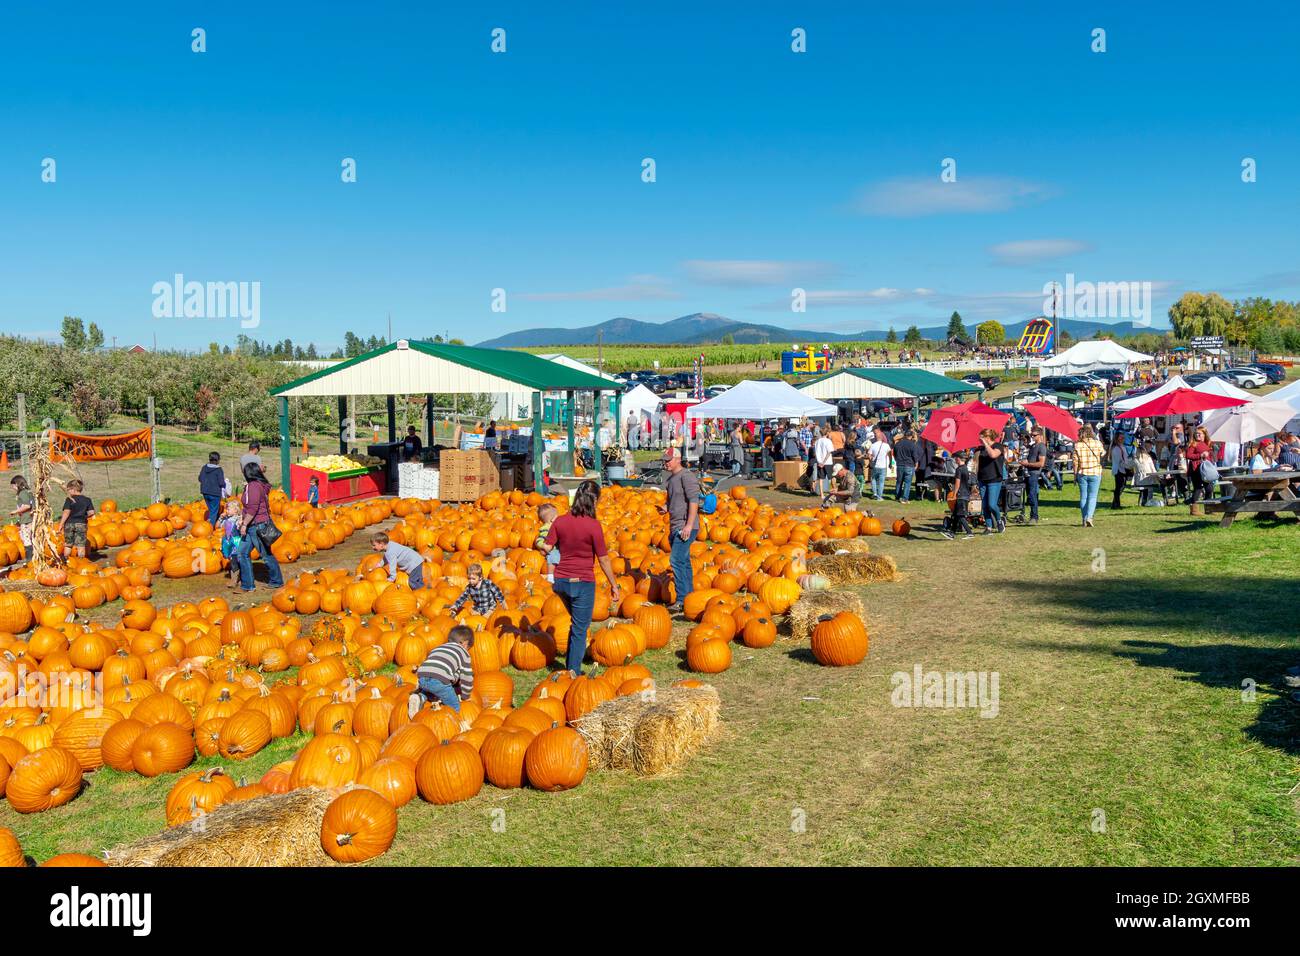 Families search for pumpkins at an October Fall Harvest Festival in Green Bluff, a suburb of Spokane Washington, USA. Stock Photo